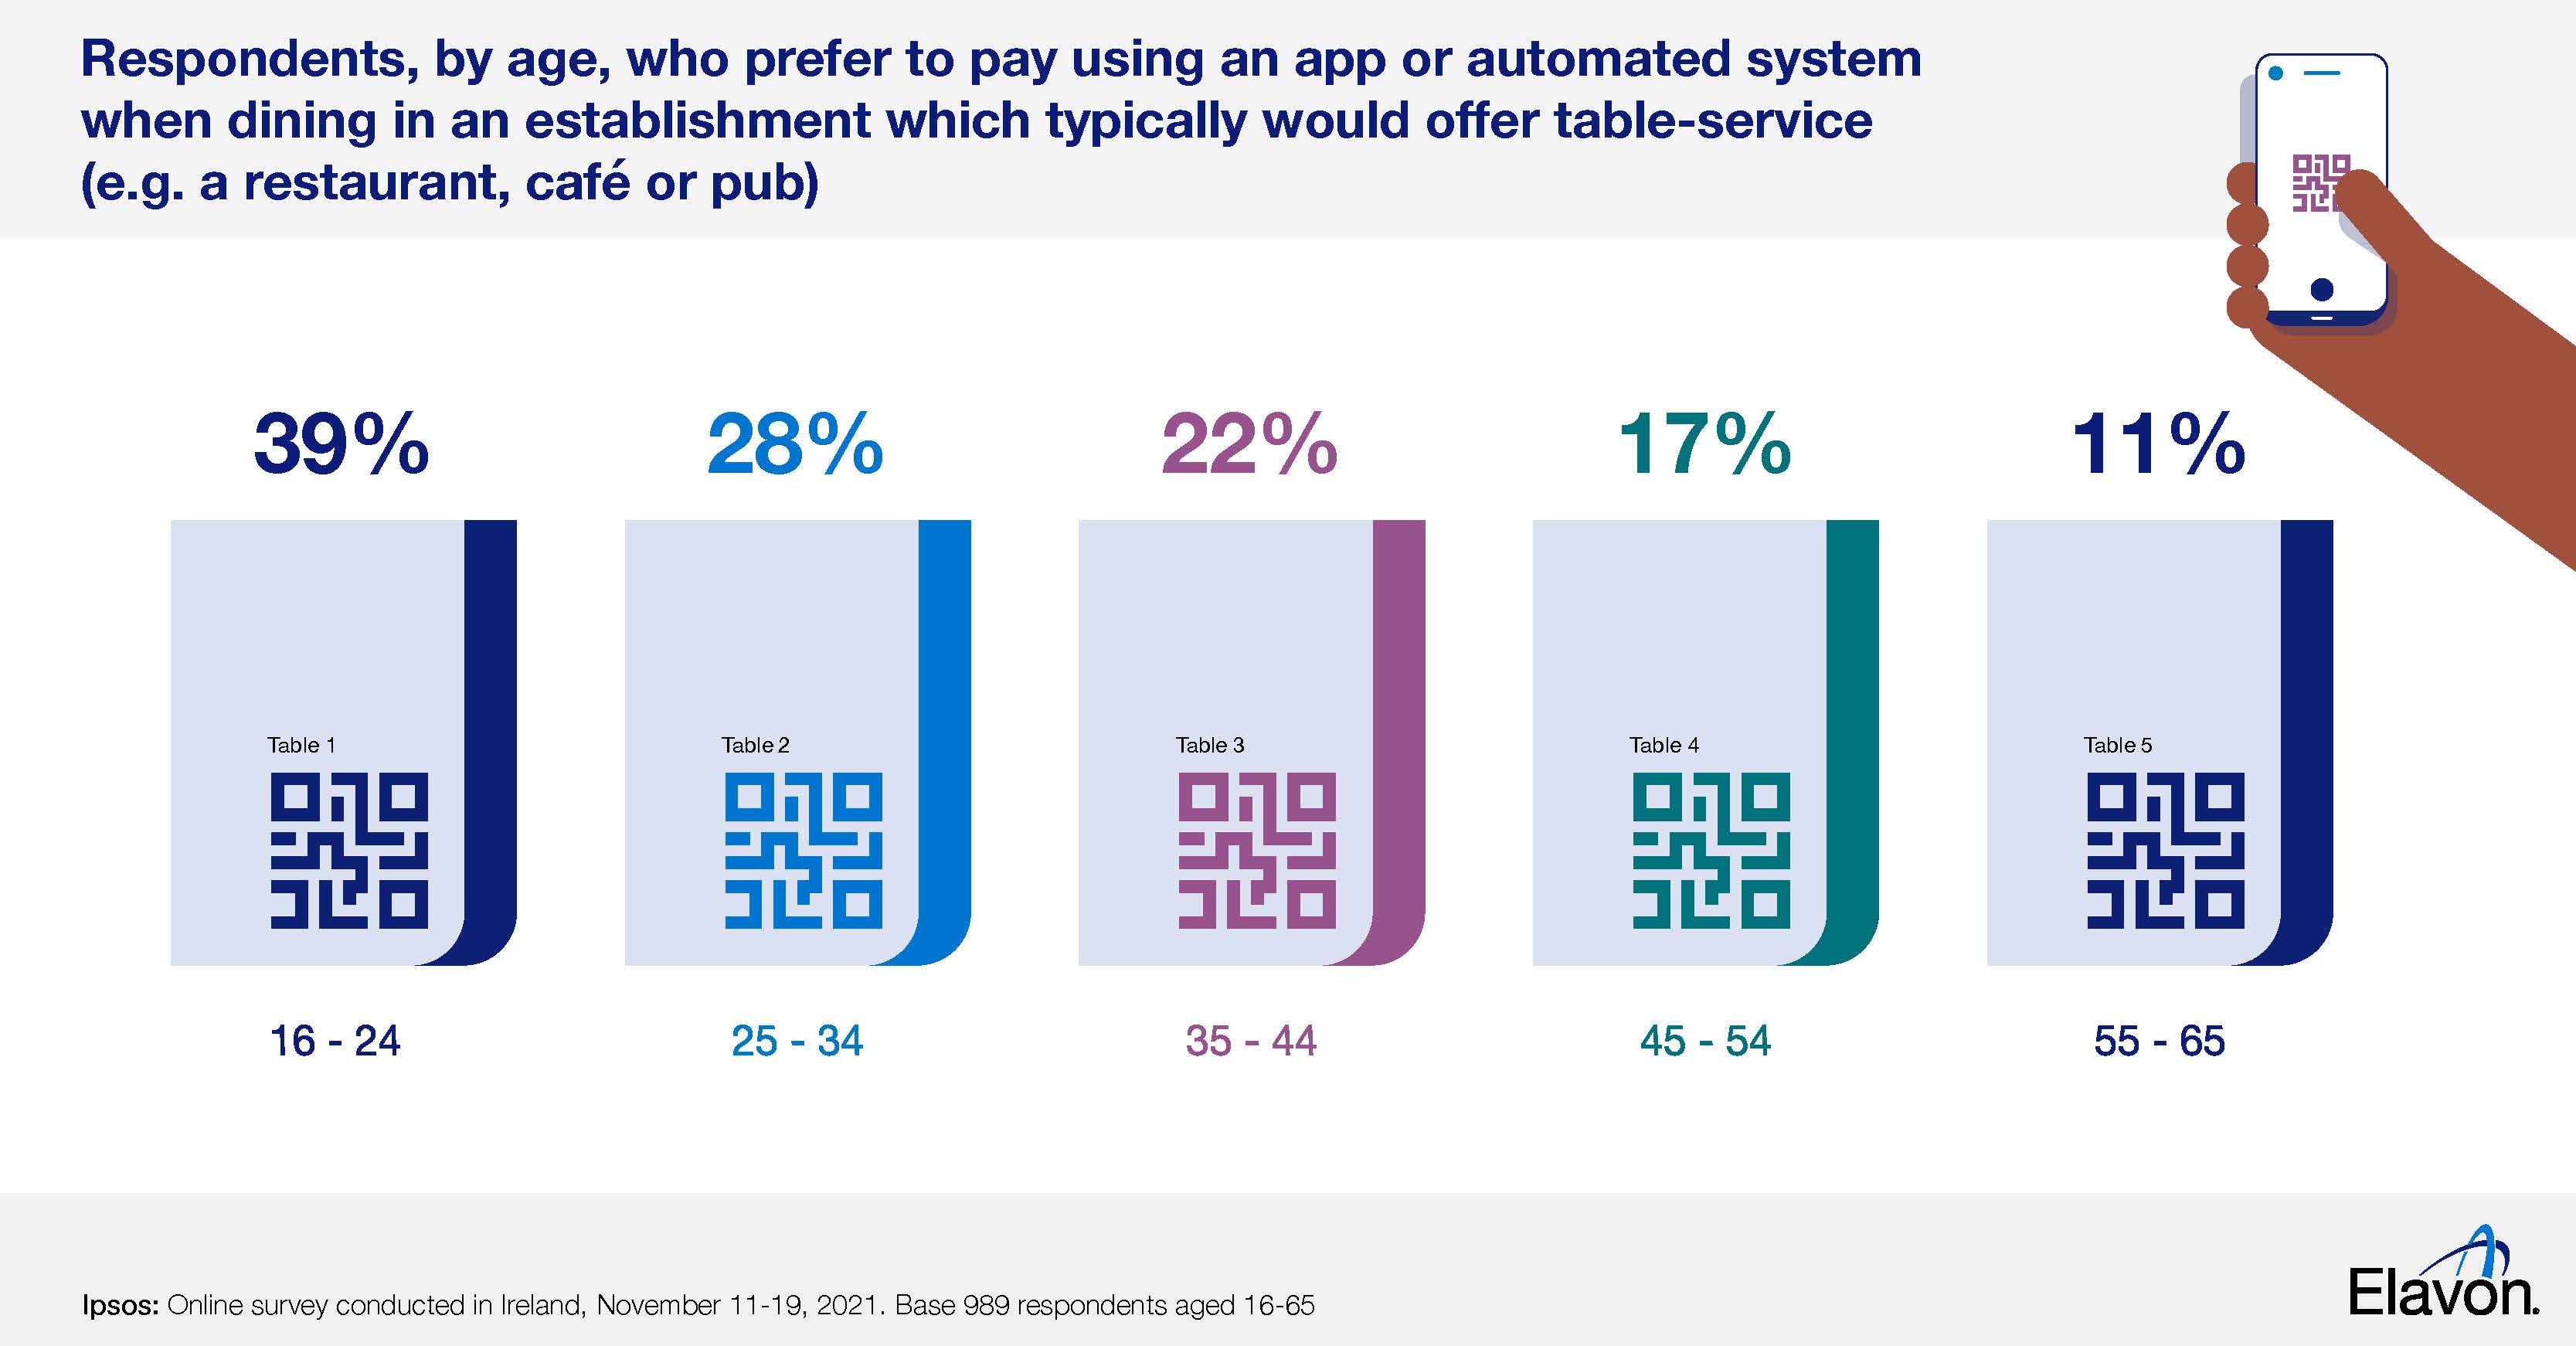 Respondents by age prefering to pay by app when dining